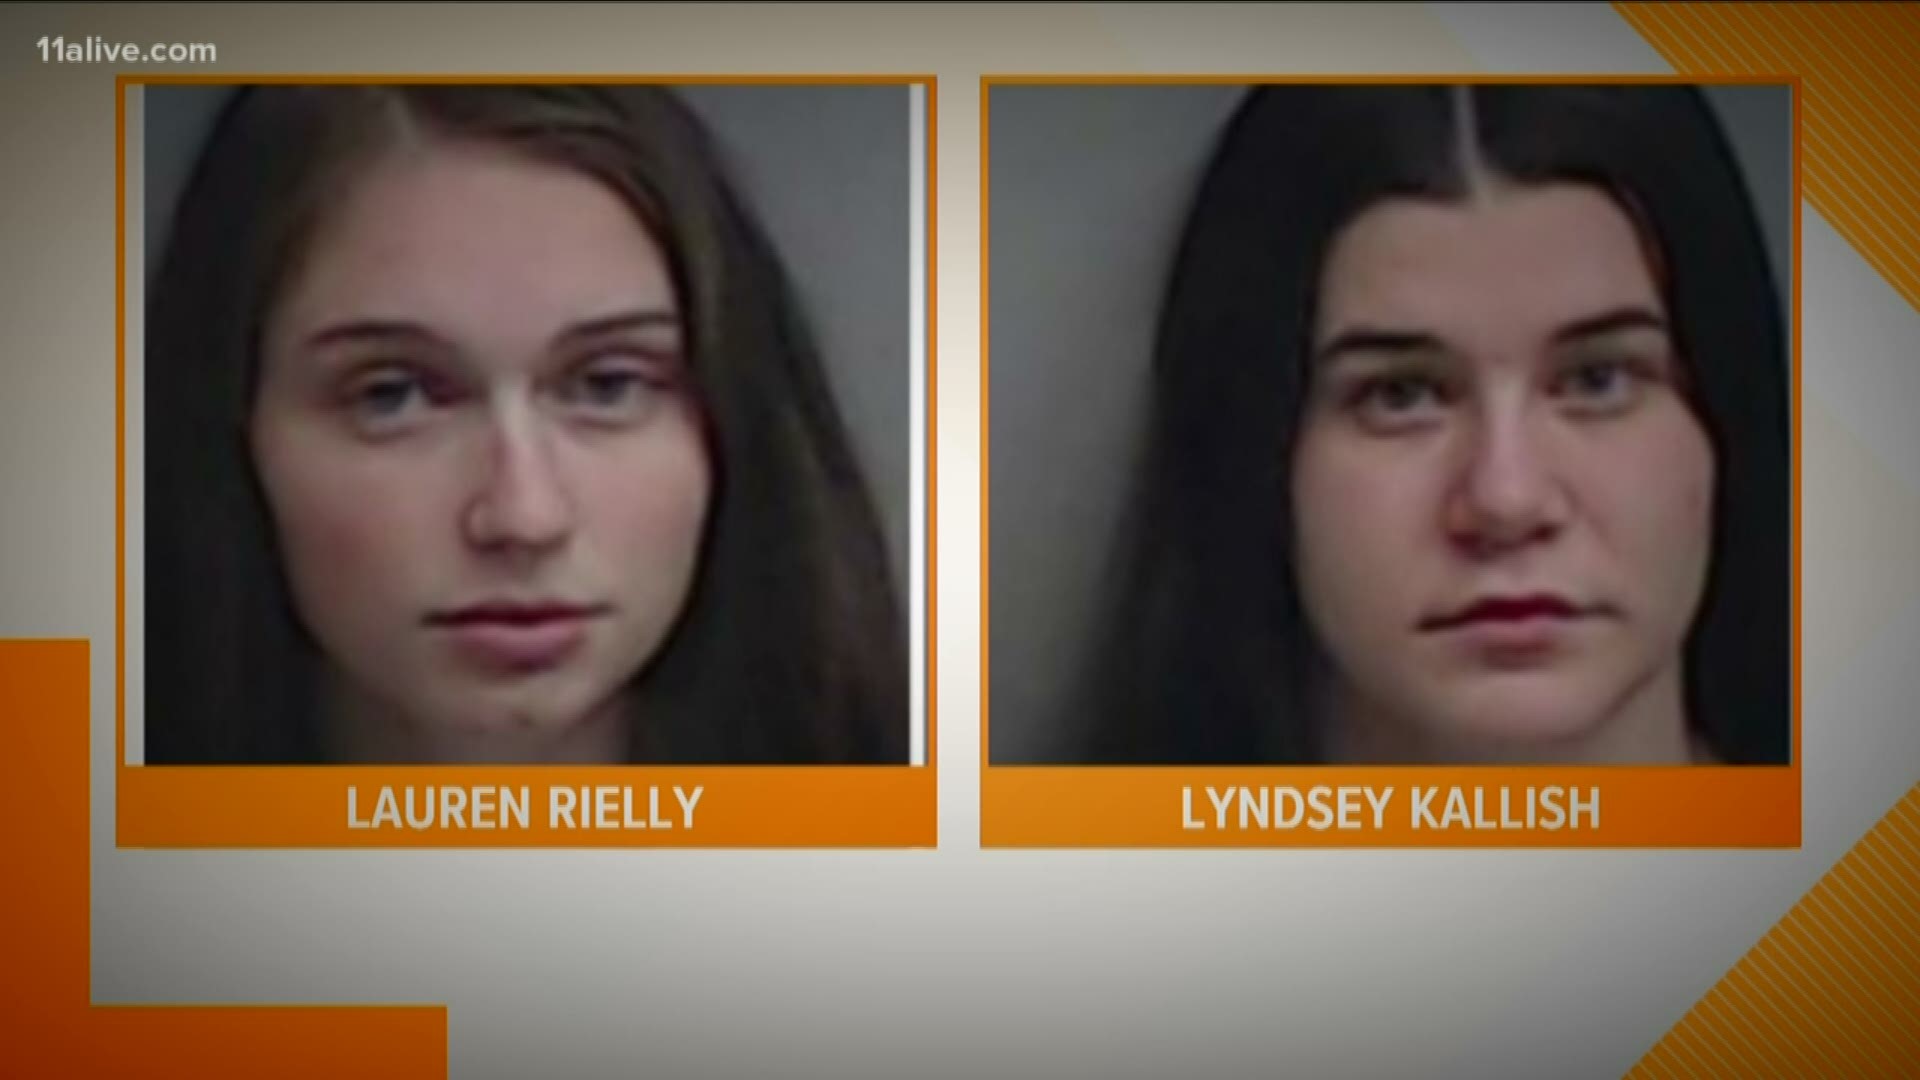 A preliminary hearing was held Monday for Lyndsey Kallish and Lauren Rielly, Life University lacrosse players charged with involvement in an armed robbery.